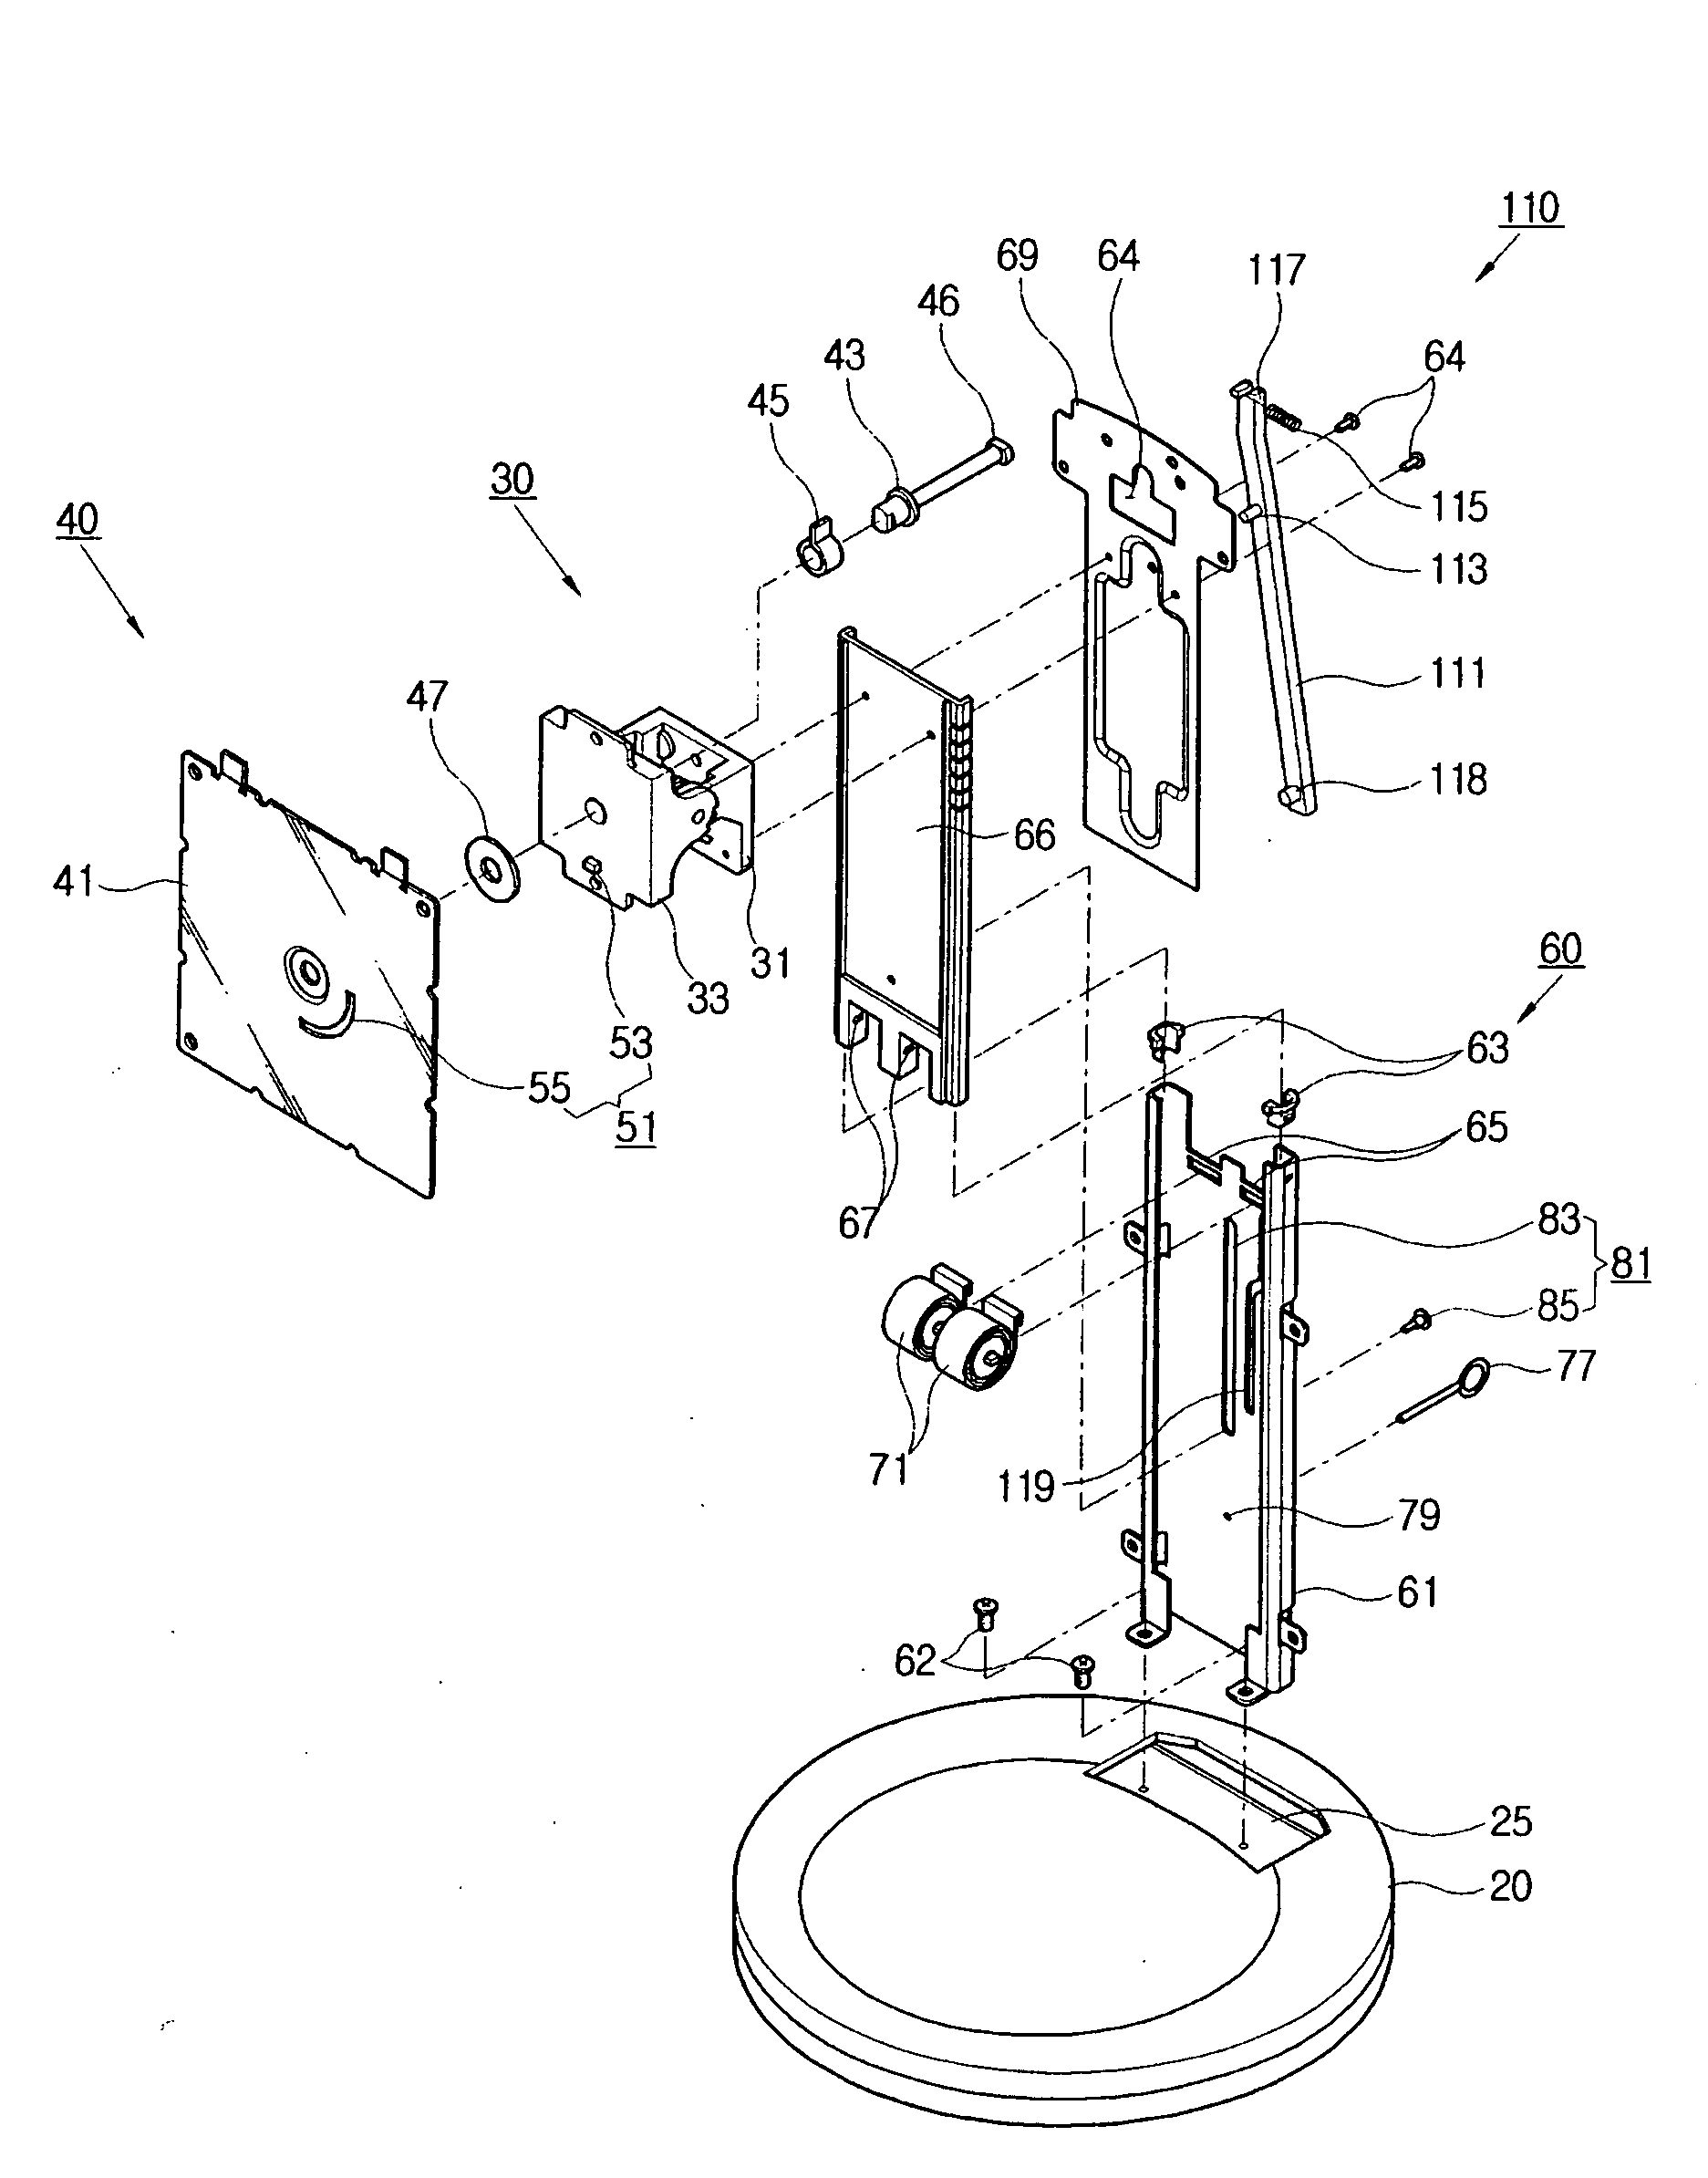 Stand and display apparatus having the same